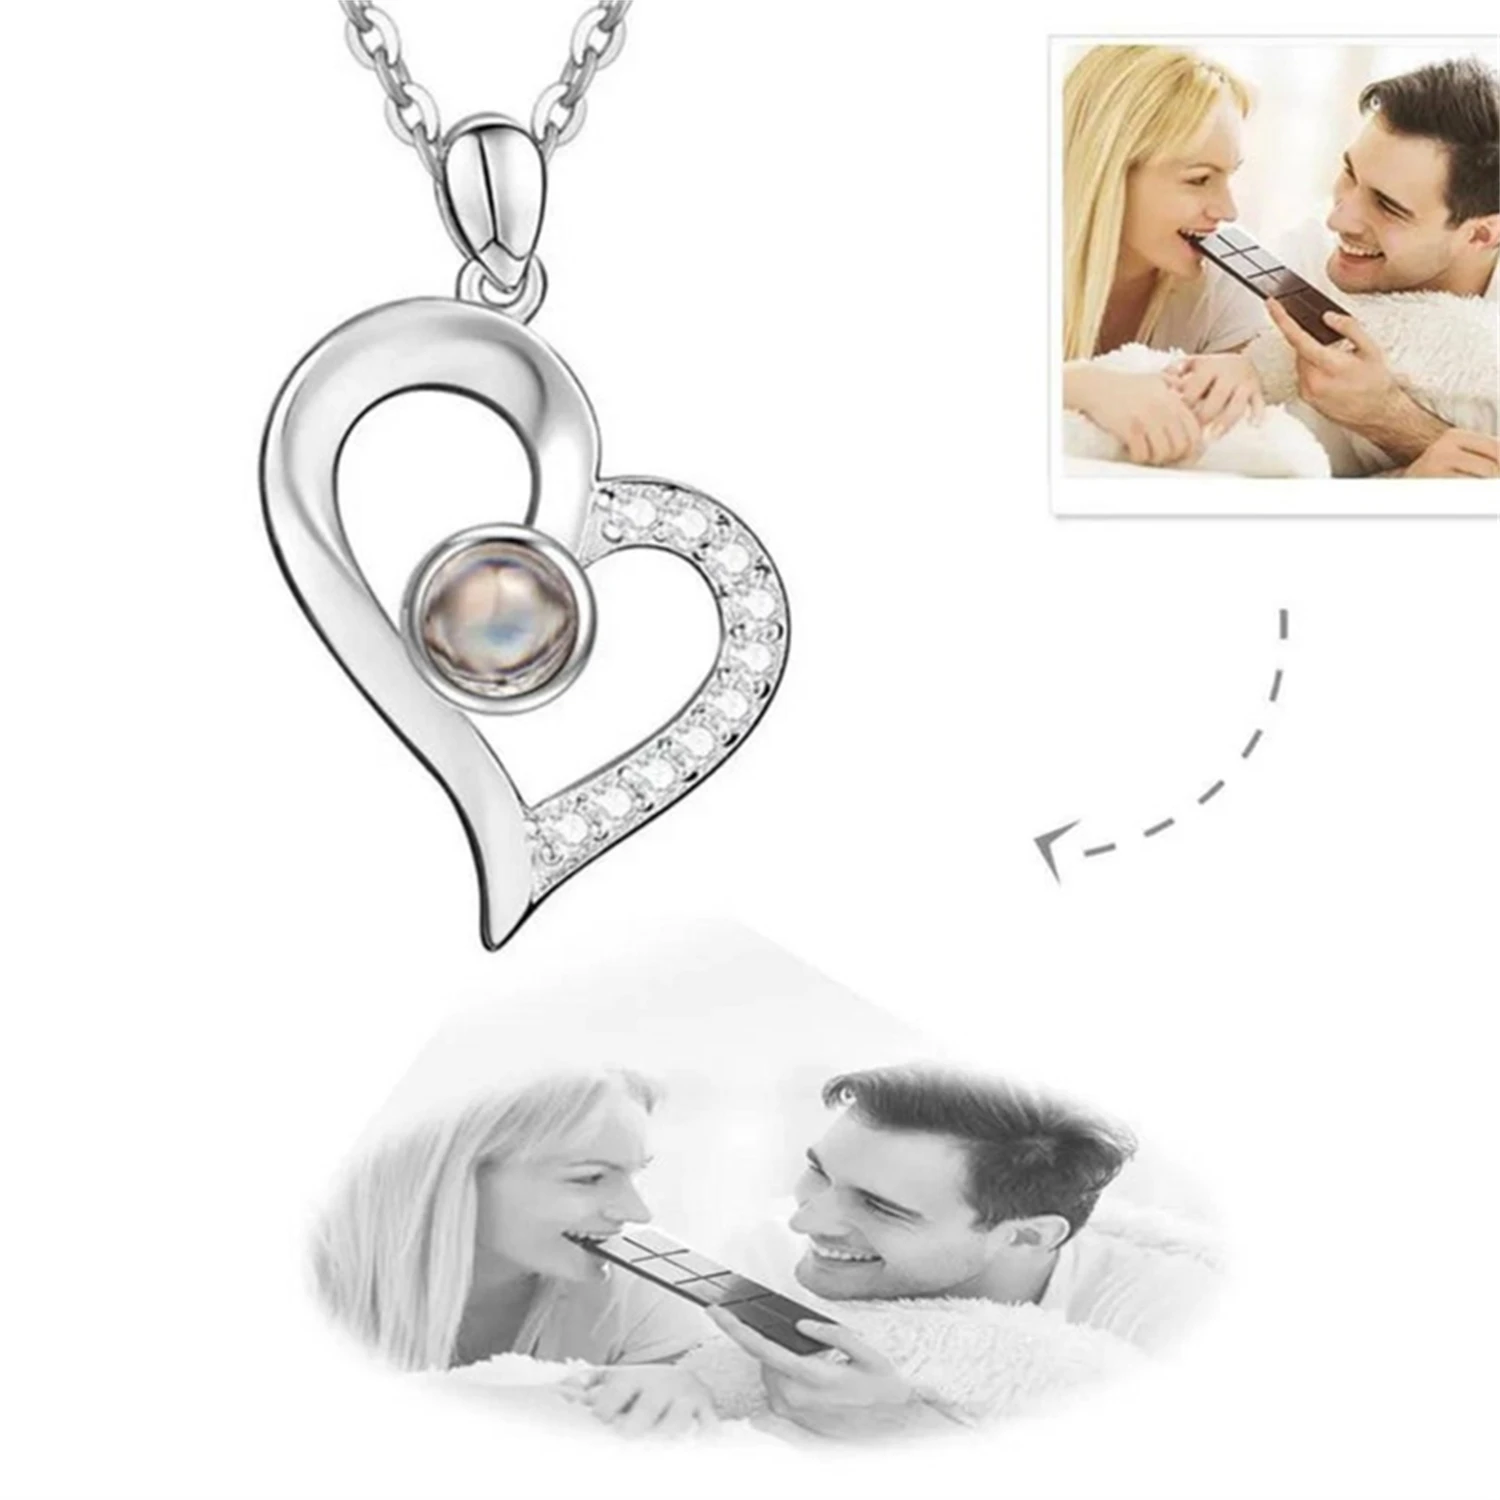 

Projection Necklace Heart Locket Necklace Gift for Her Valentines Personalized Photo Heart Pendant Mother's Day Women Jewelry